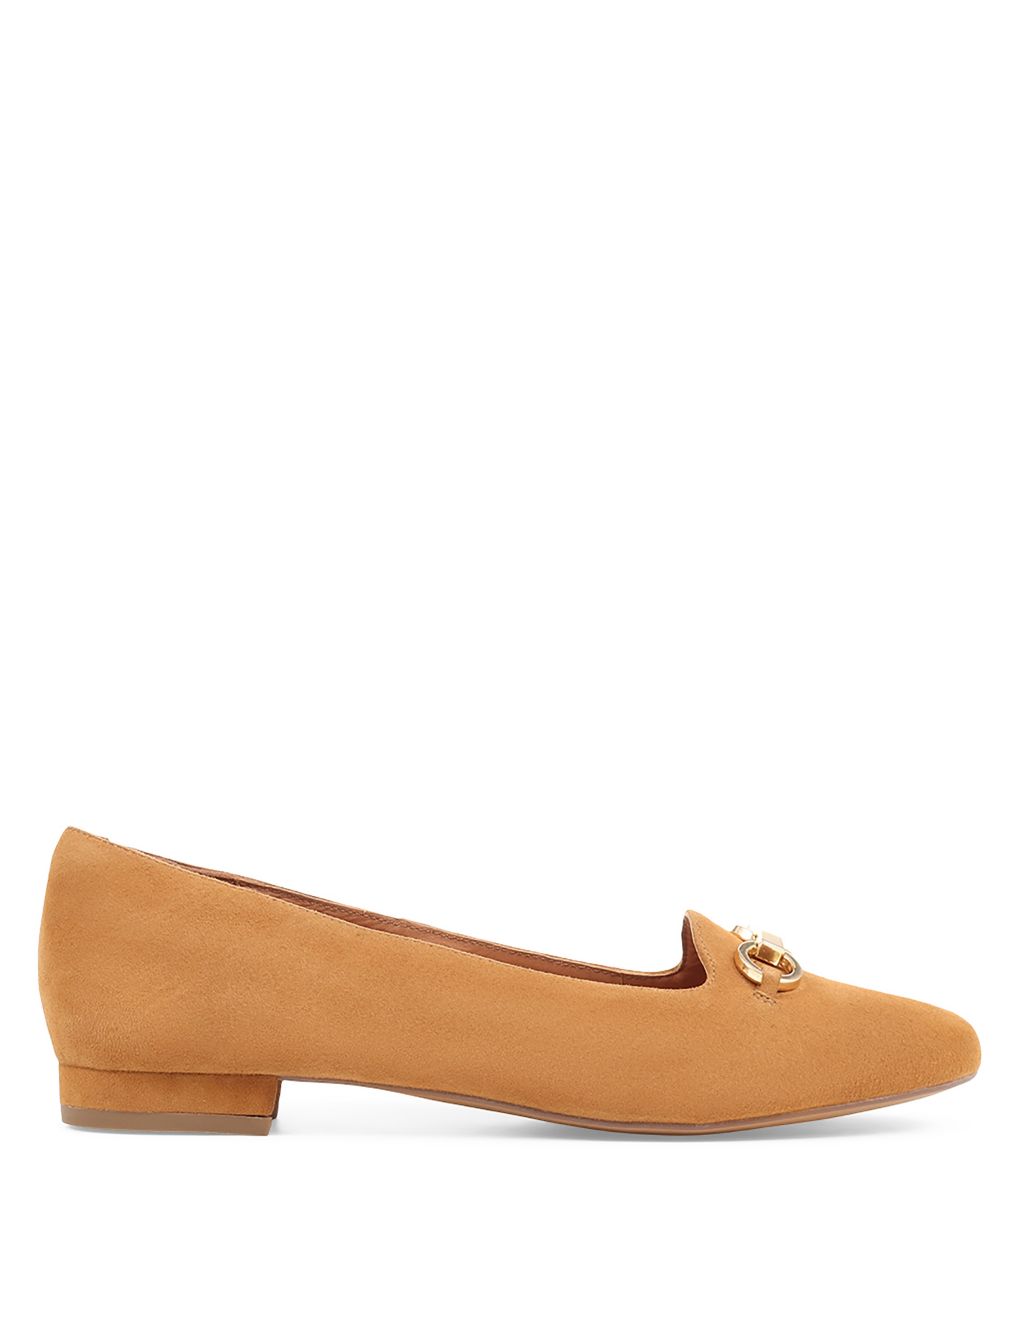 Suede Buckle Flat Loafers image 4